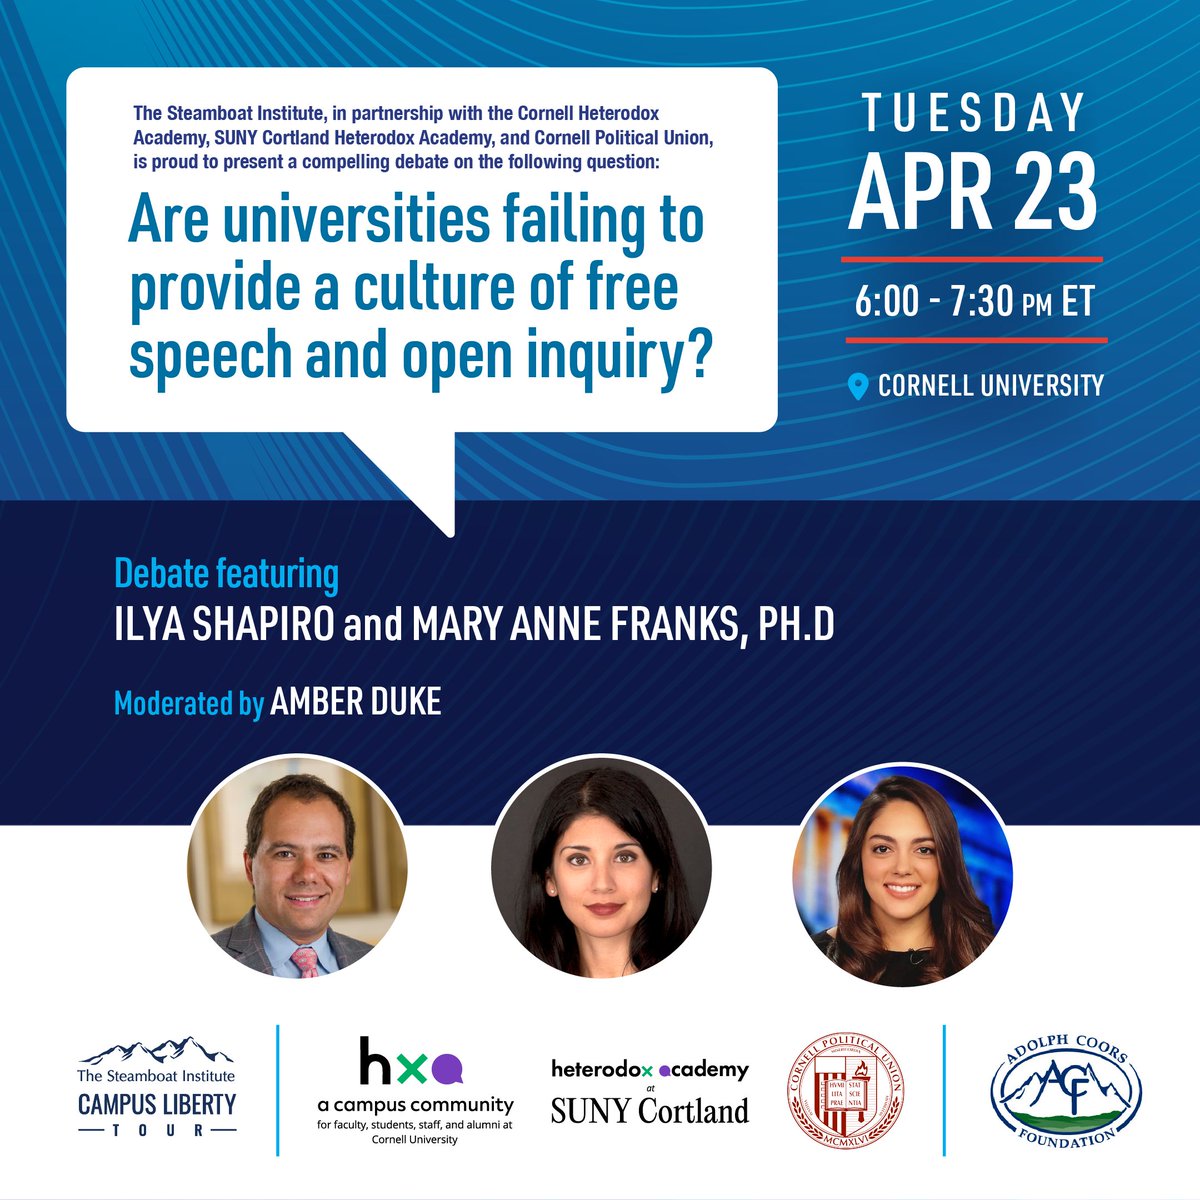 Tomorrow evening I will be moderating a debate between @ishapiro and @ma_franks at Cornell University: Are universities failing to provide a culture of free speech and open inquiry? You can register through @Steamboat_Inst to watch the debate live online: